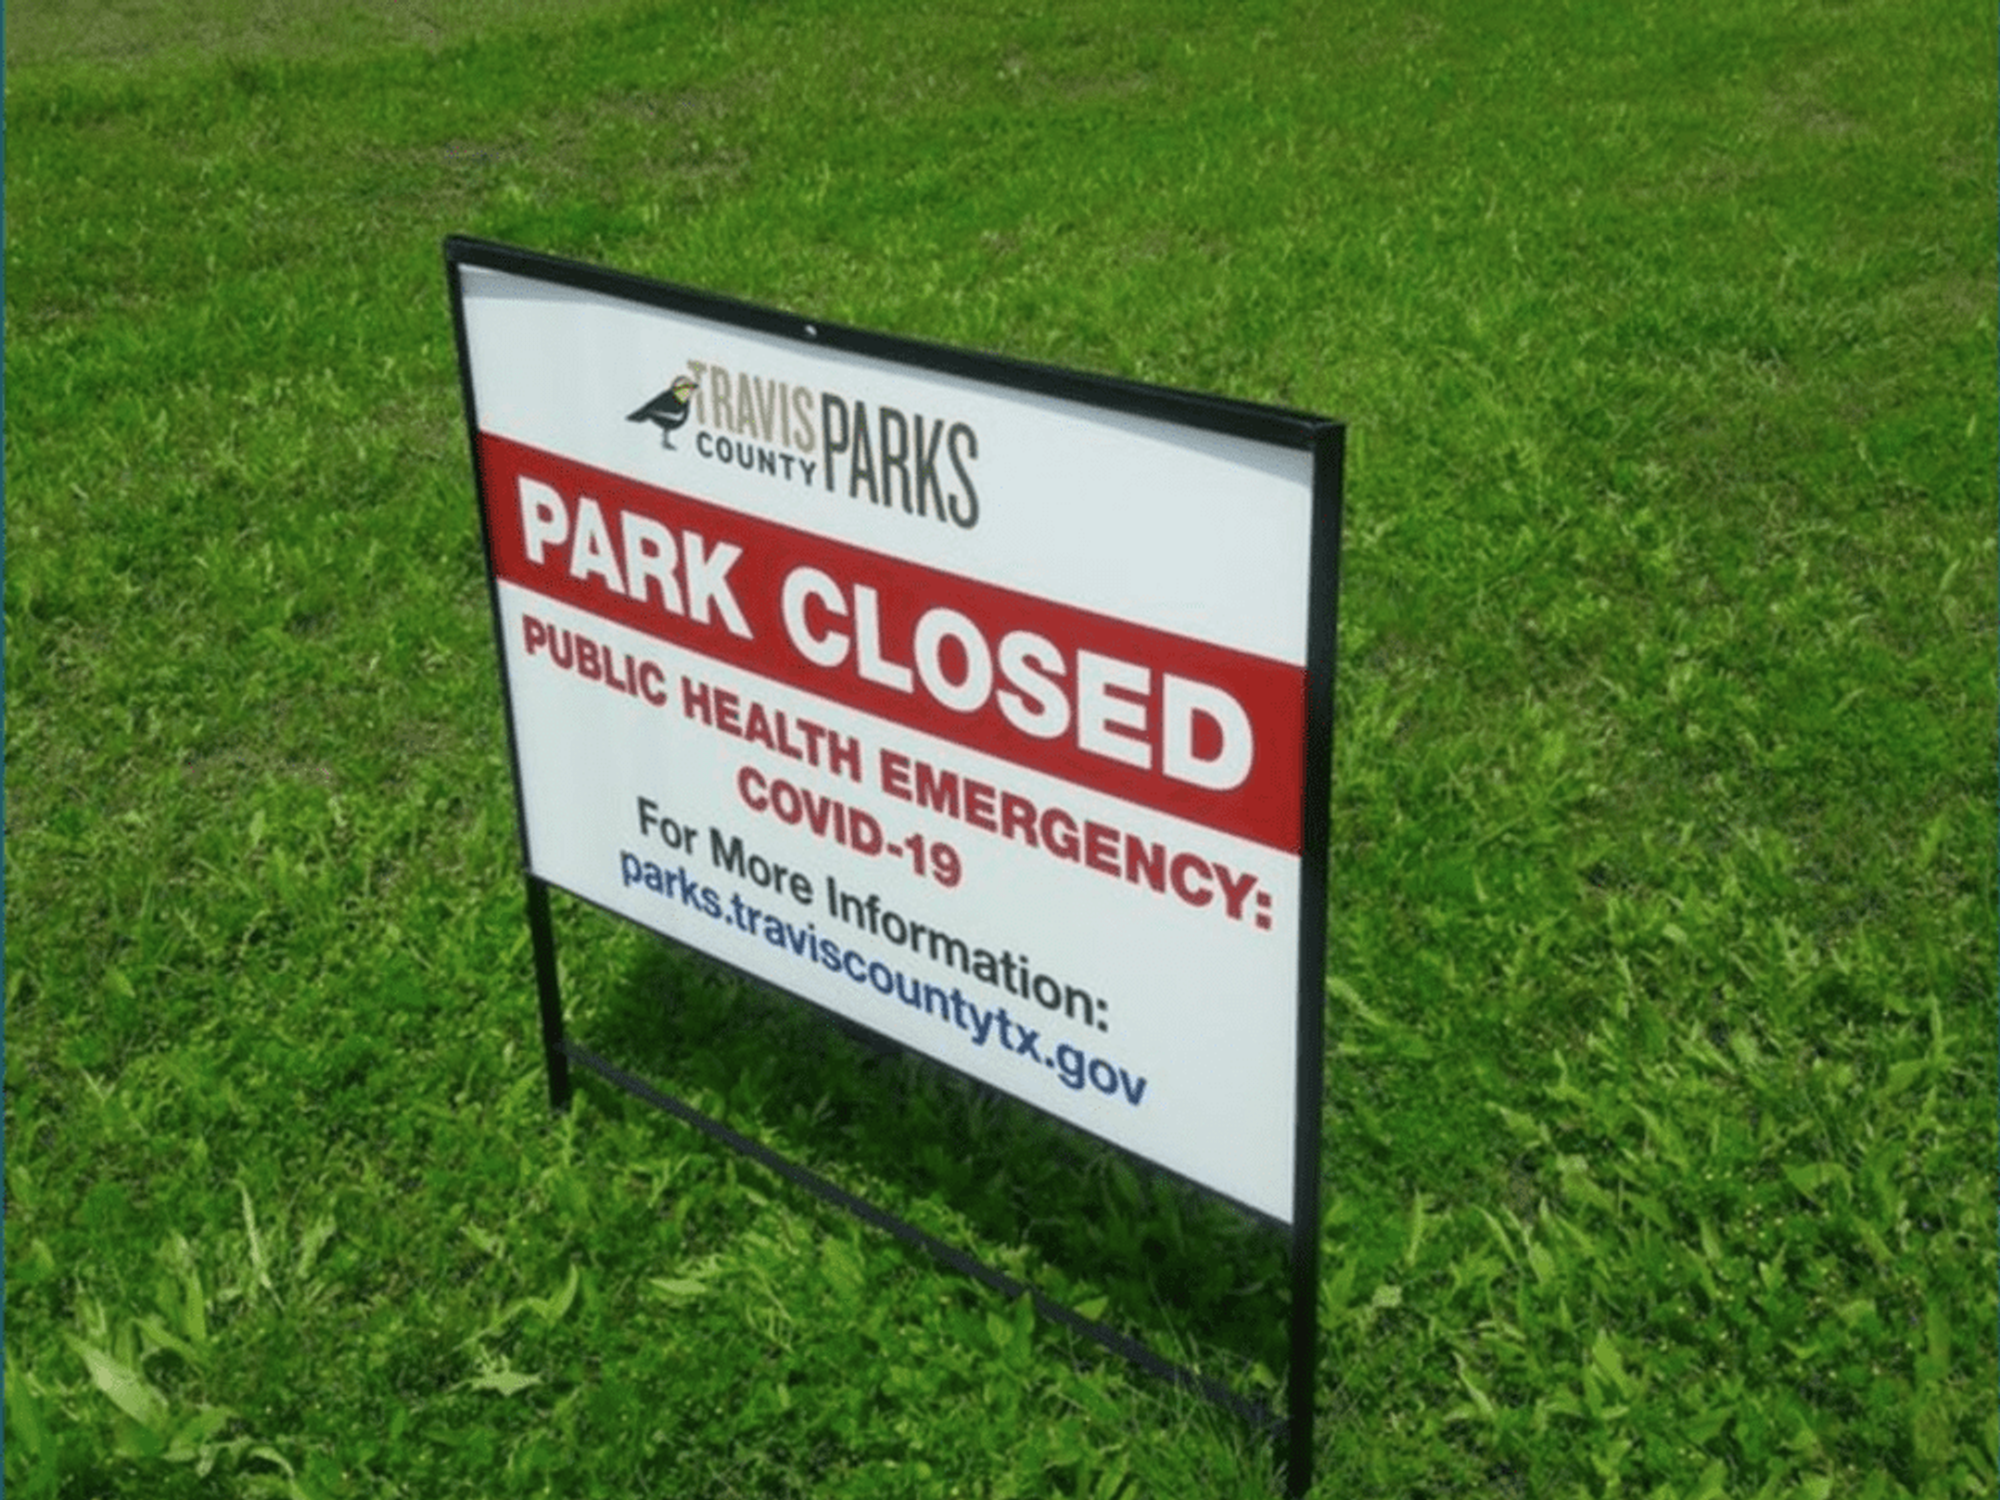 Park Closed sign for Austin/Travis County